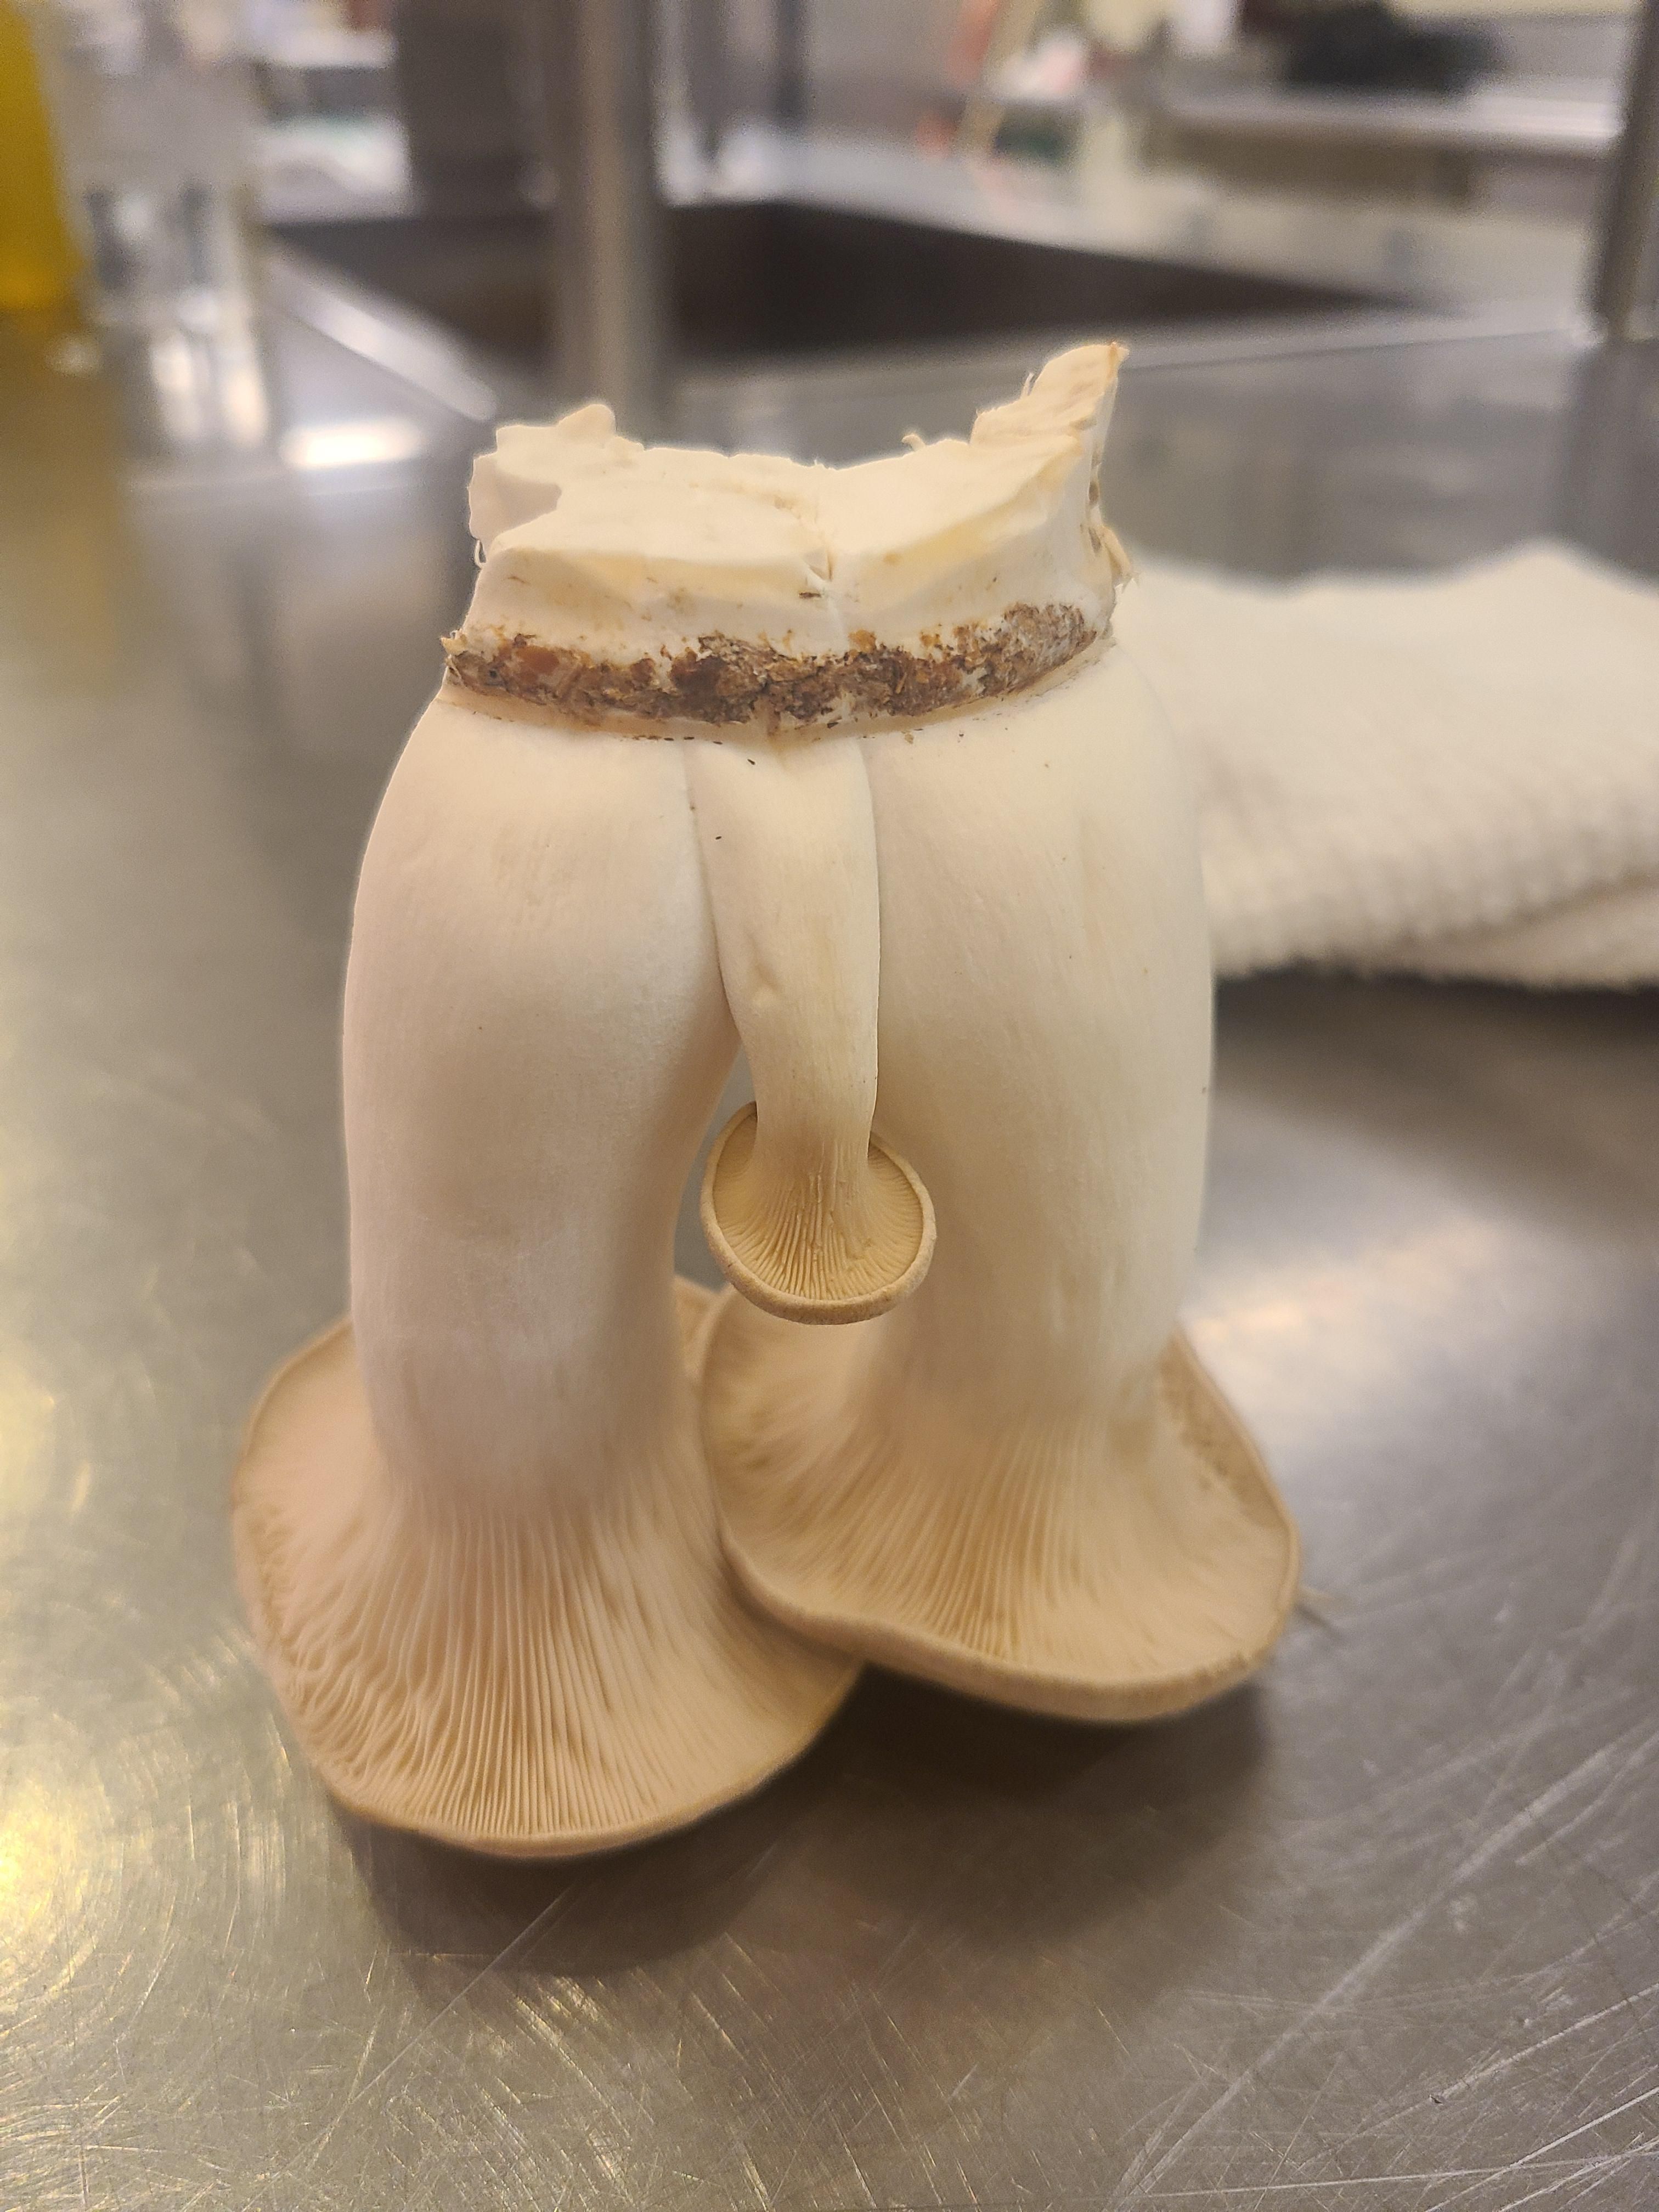 Look at this confident ass mushroom